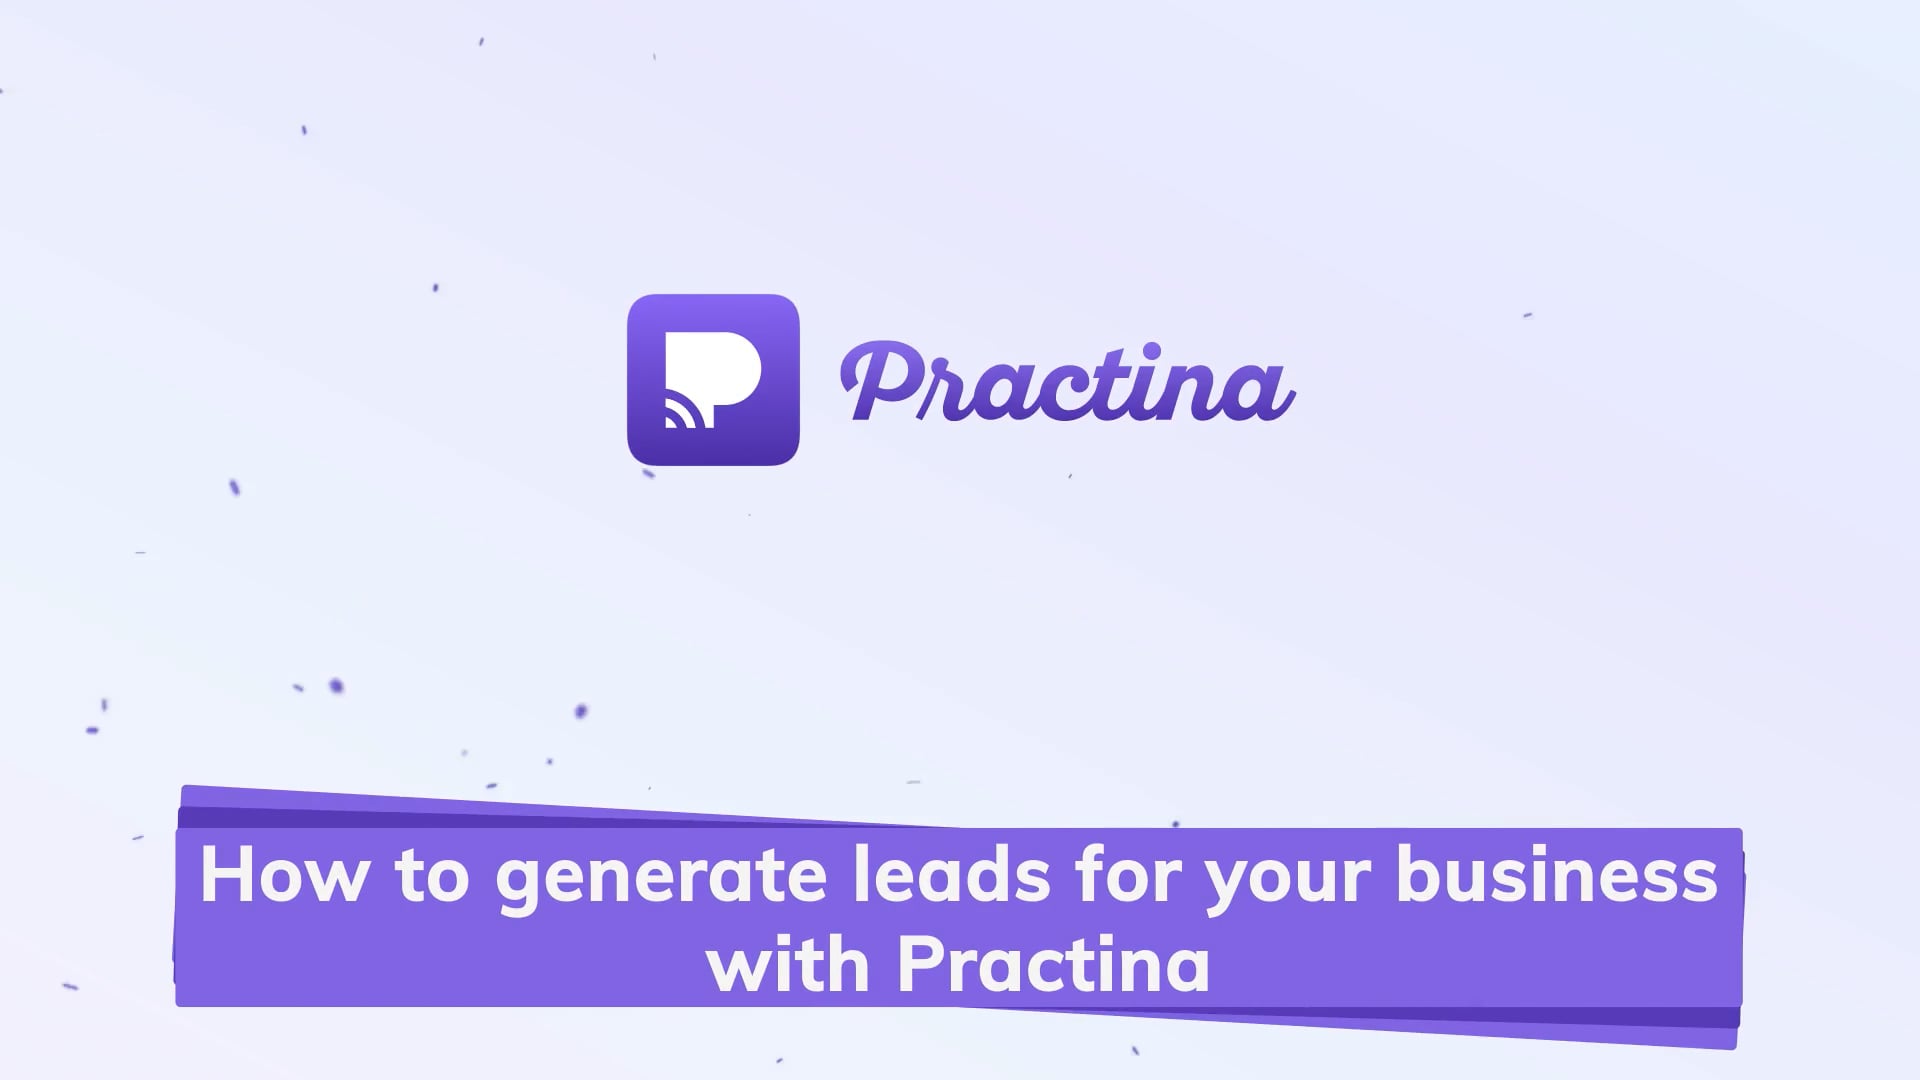 How to generate leads for your business with Practina